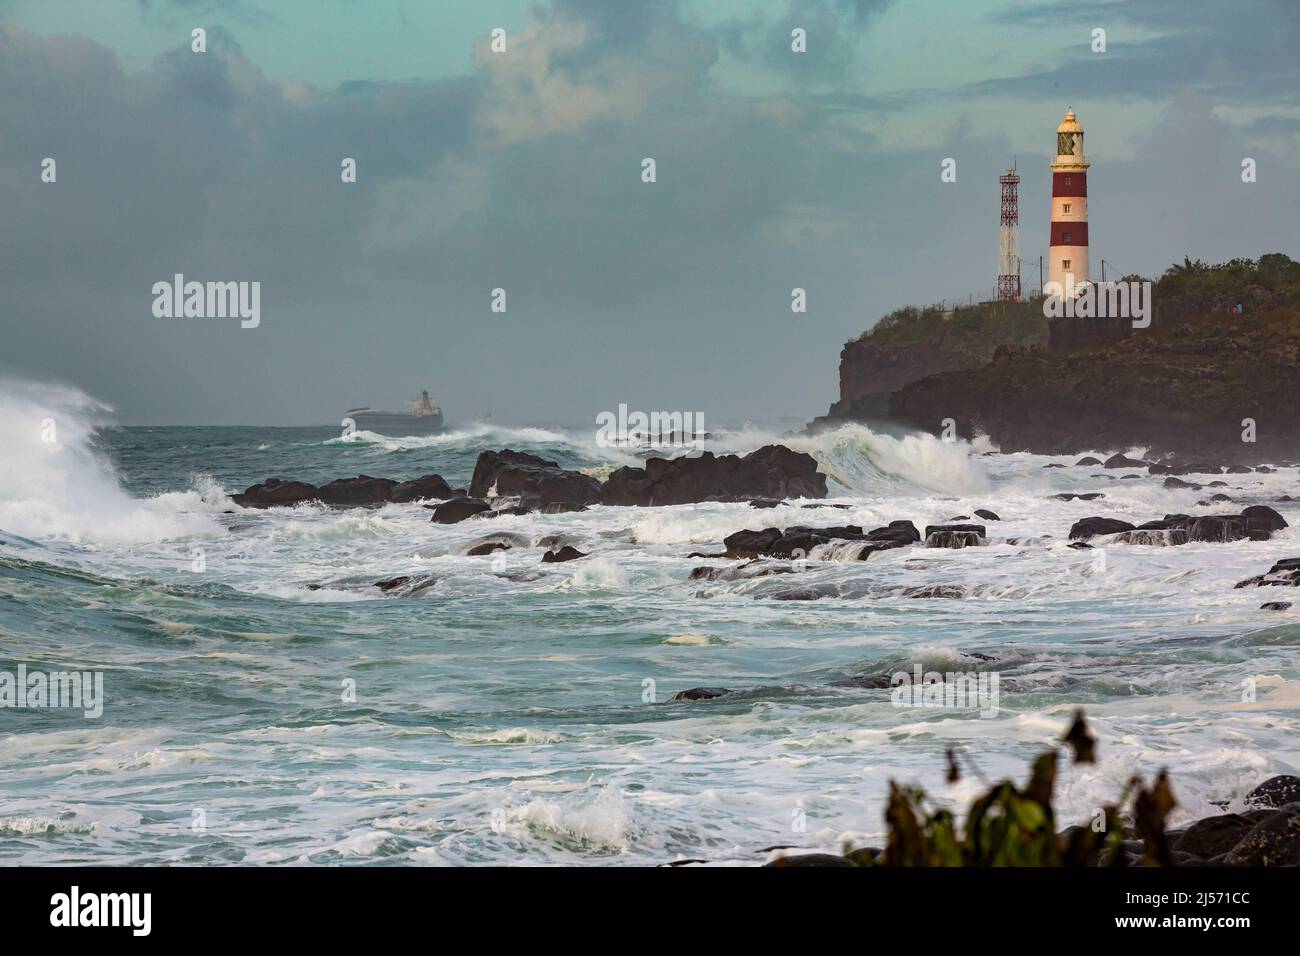 The Albion Lighthouse, otherwise known as the Pointe aux Caves Lighthouse during tropical cyclone, Batsirai in the island of Mauritius. Stock Photo